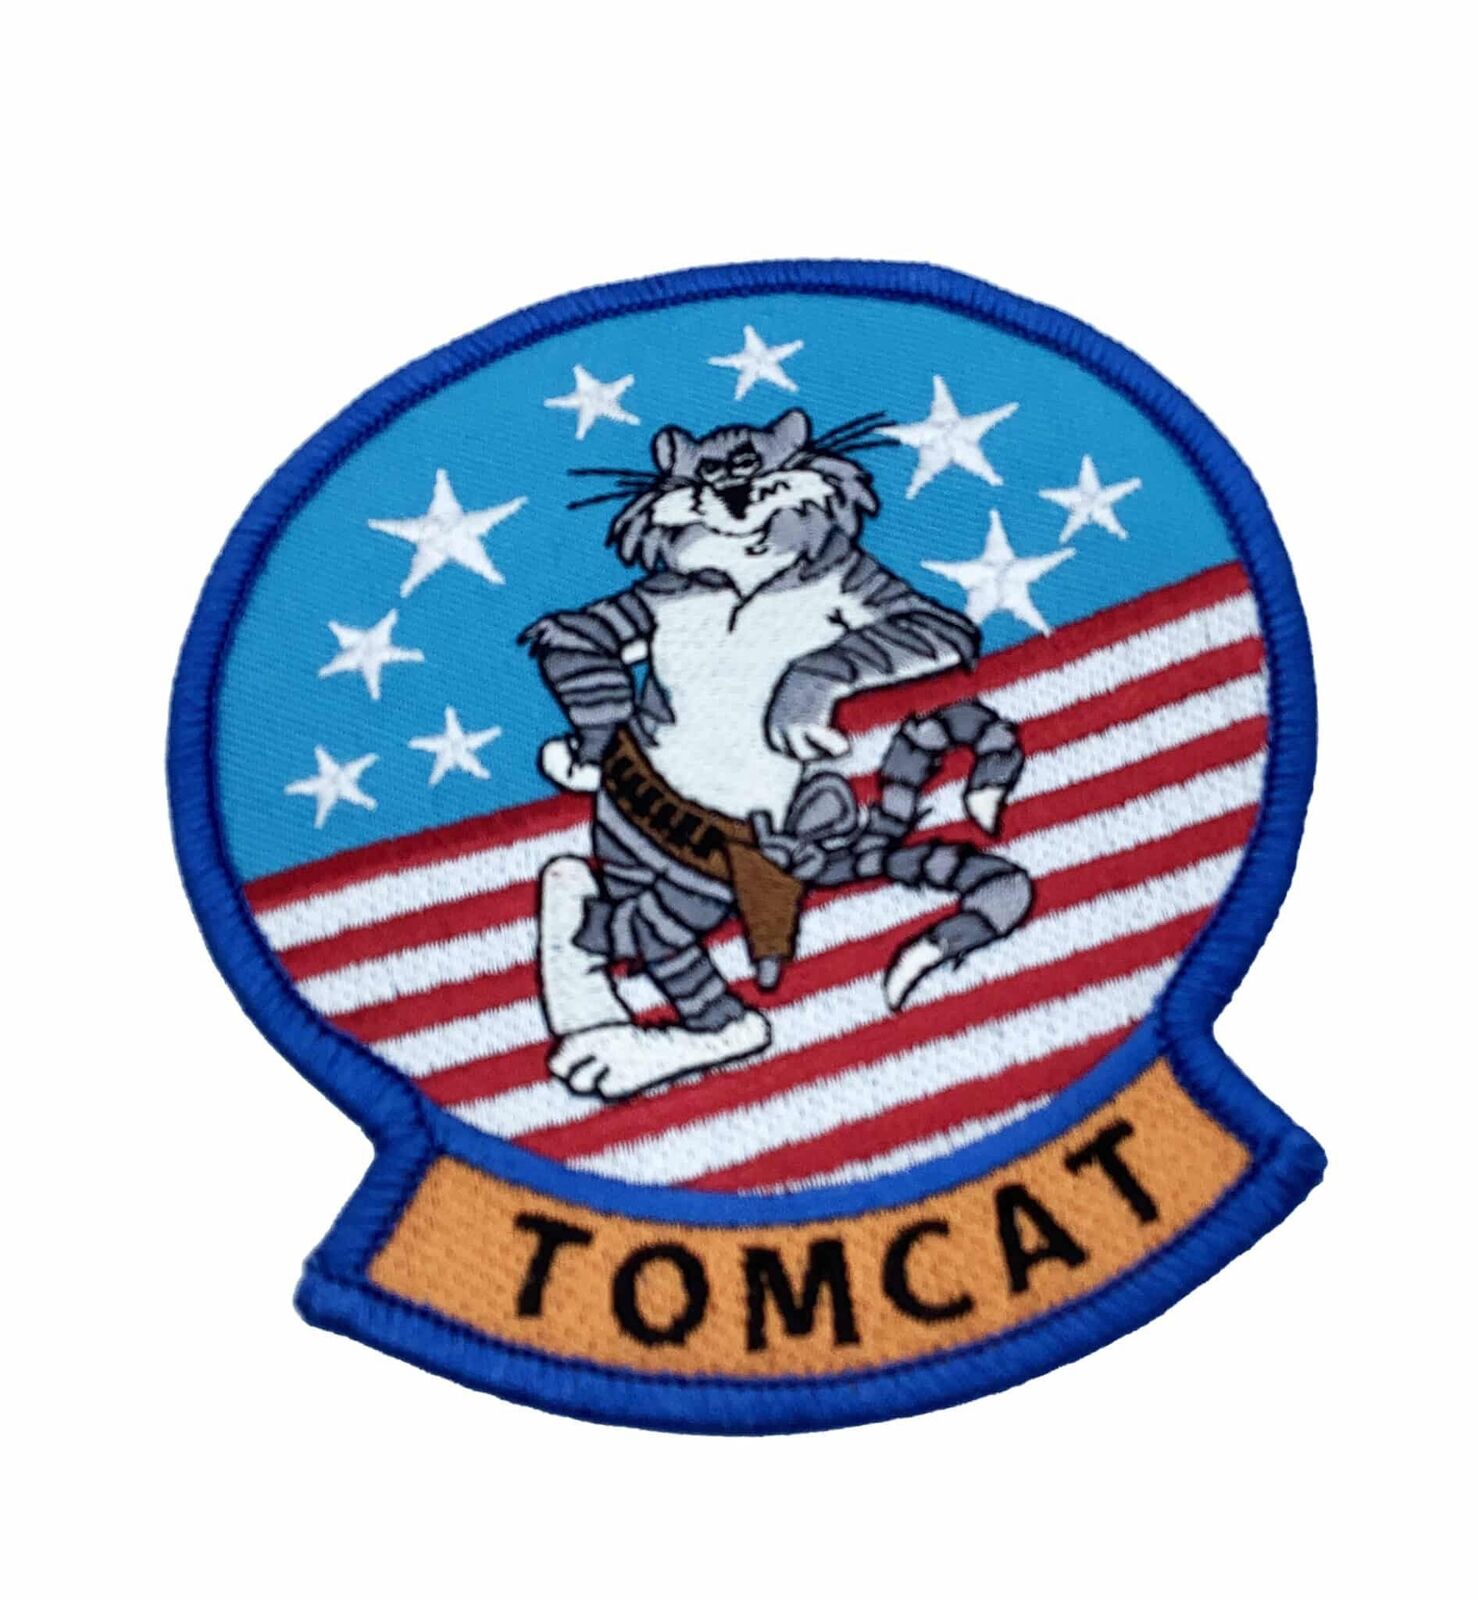 Tomcat \'Anytime Baby\' Patch – Plastic Backing